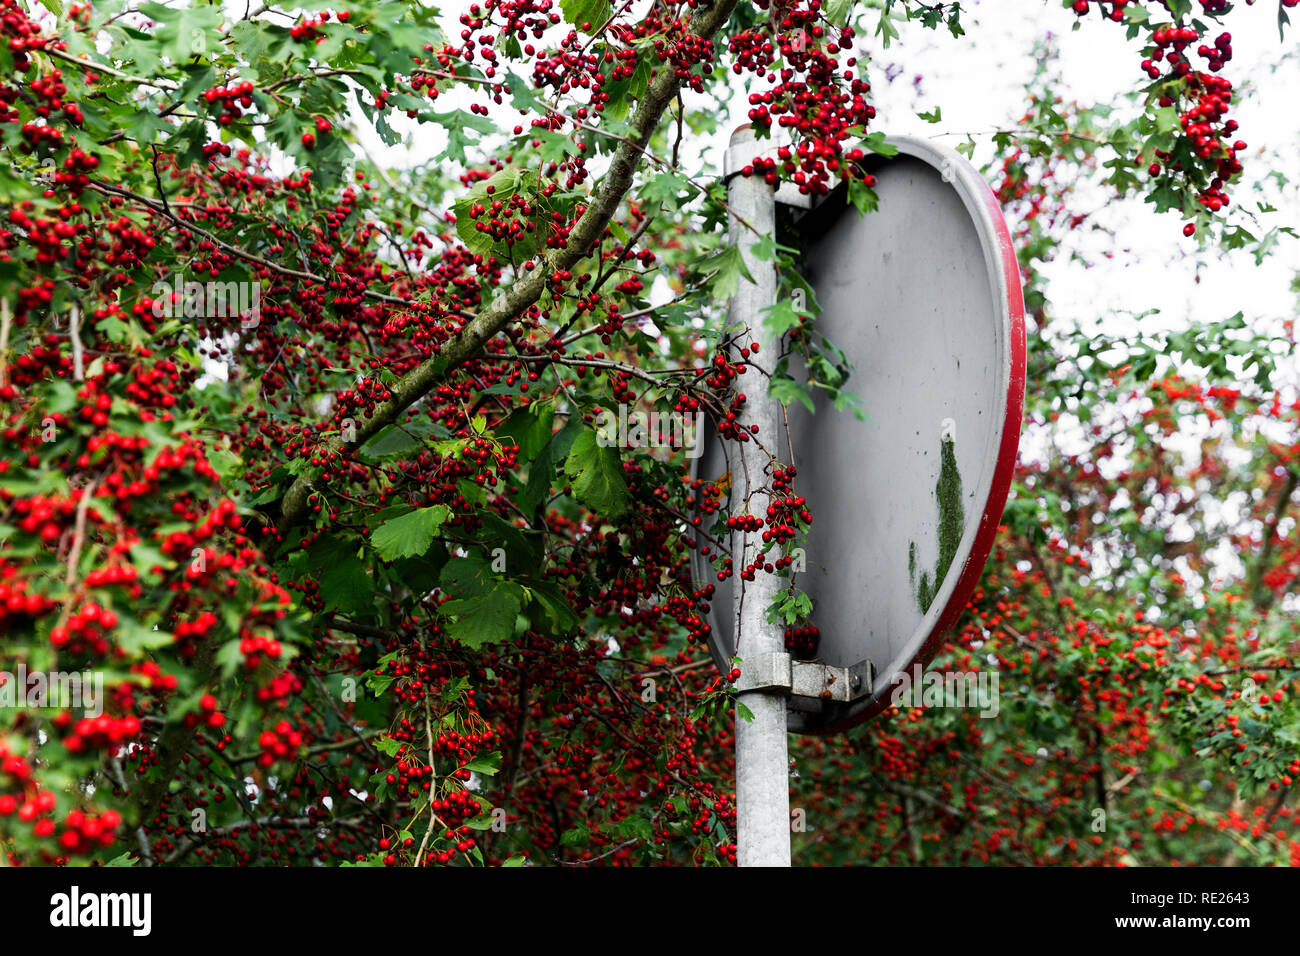 Choke berry matching red road signage. A visual illusion for those daring tomato the brain work a little. Stock Photo